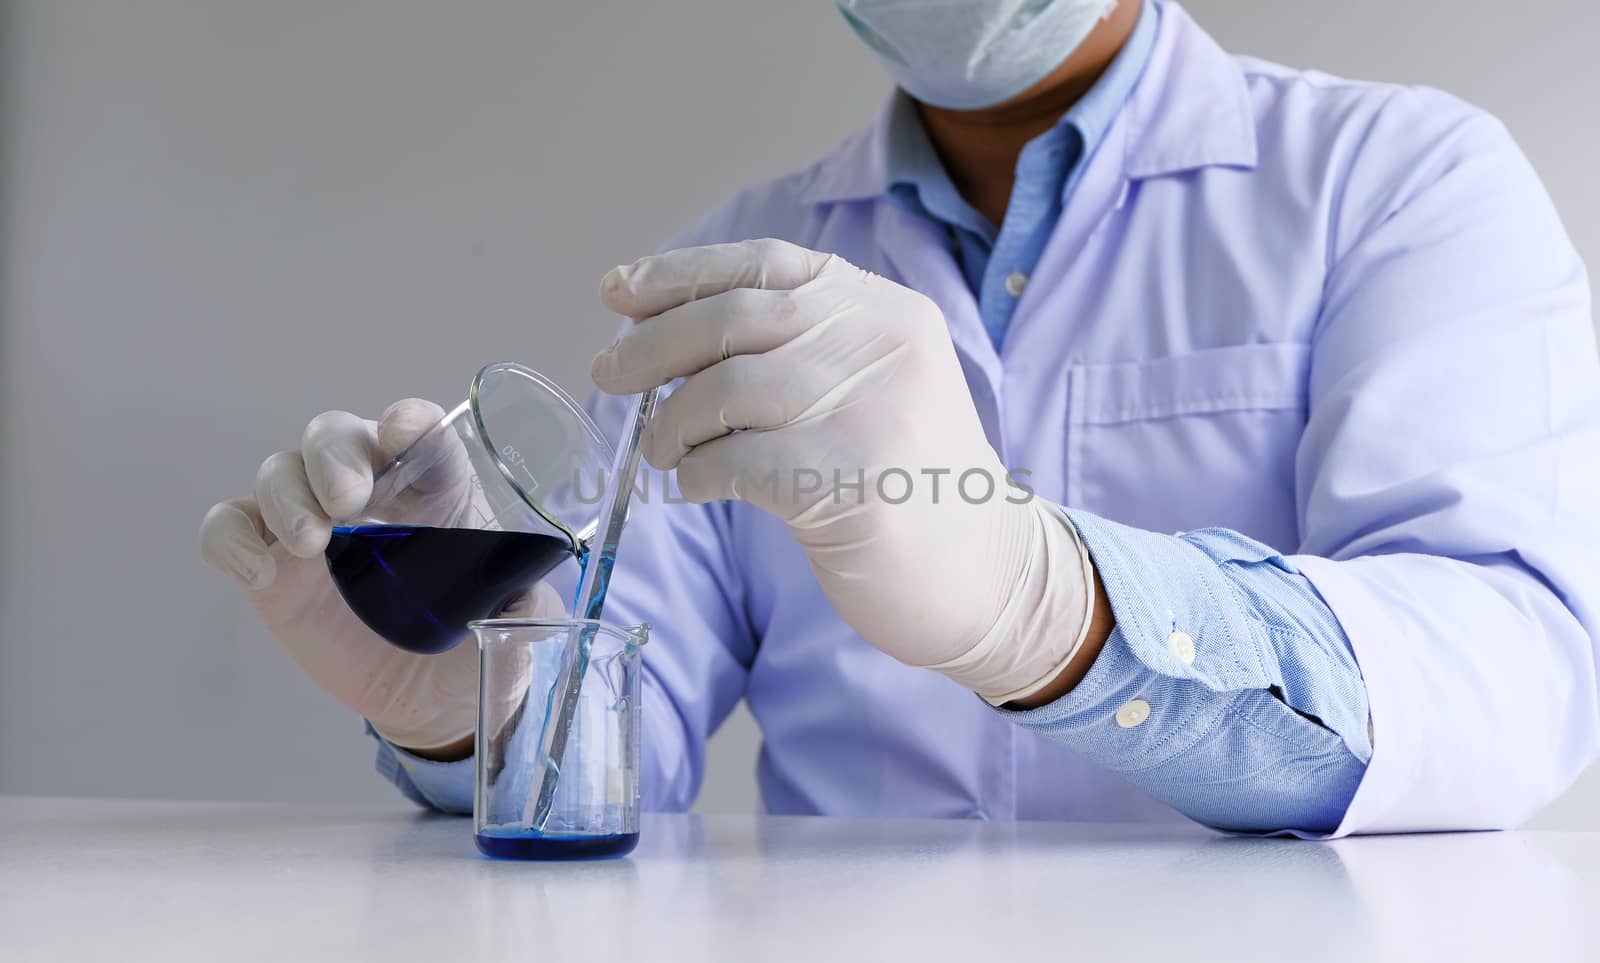 Male medical or scientific laboratory researcher performs tests with blue liquid in lab. Laboratory equipment and science experiments concept